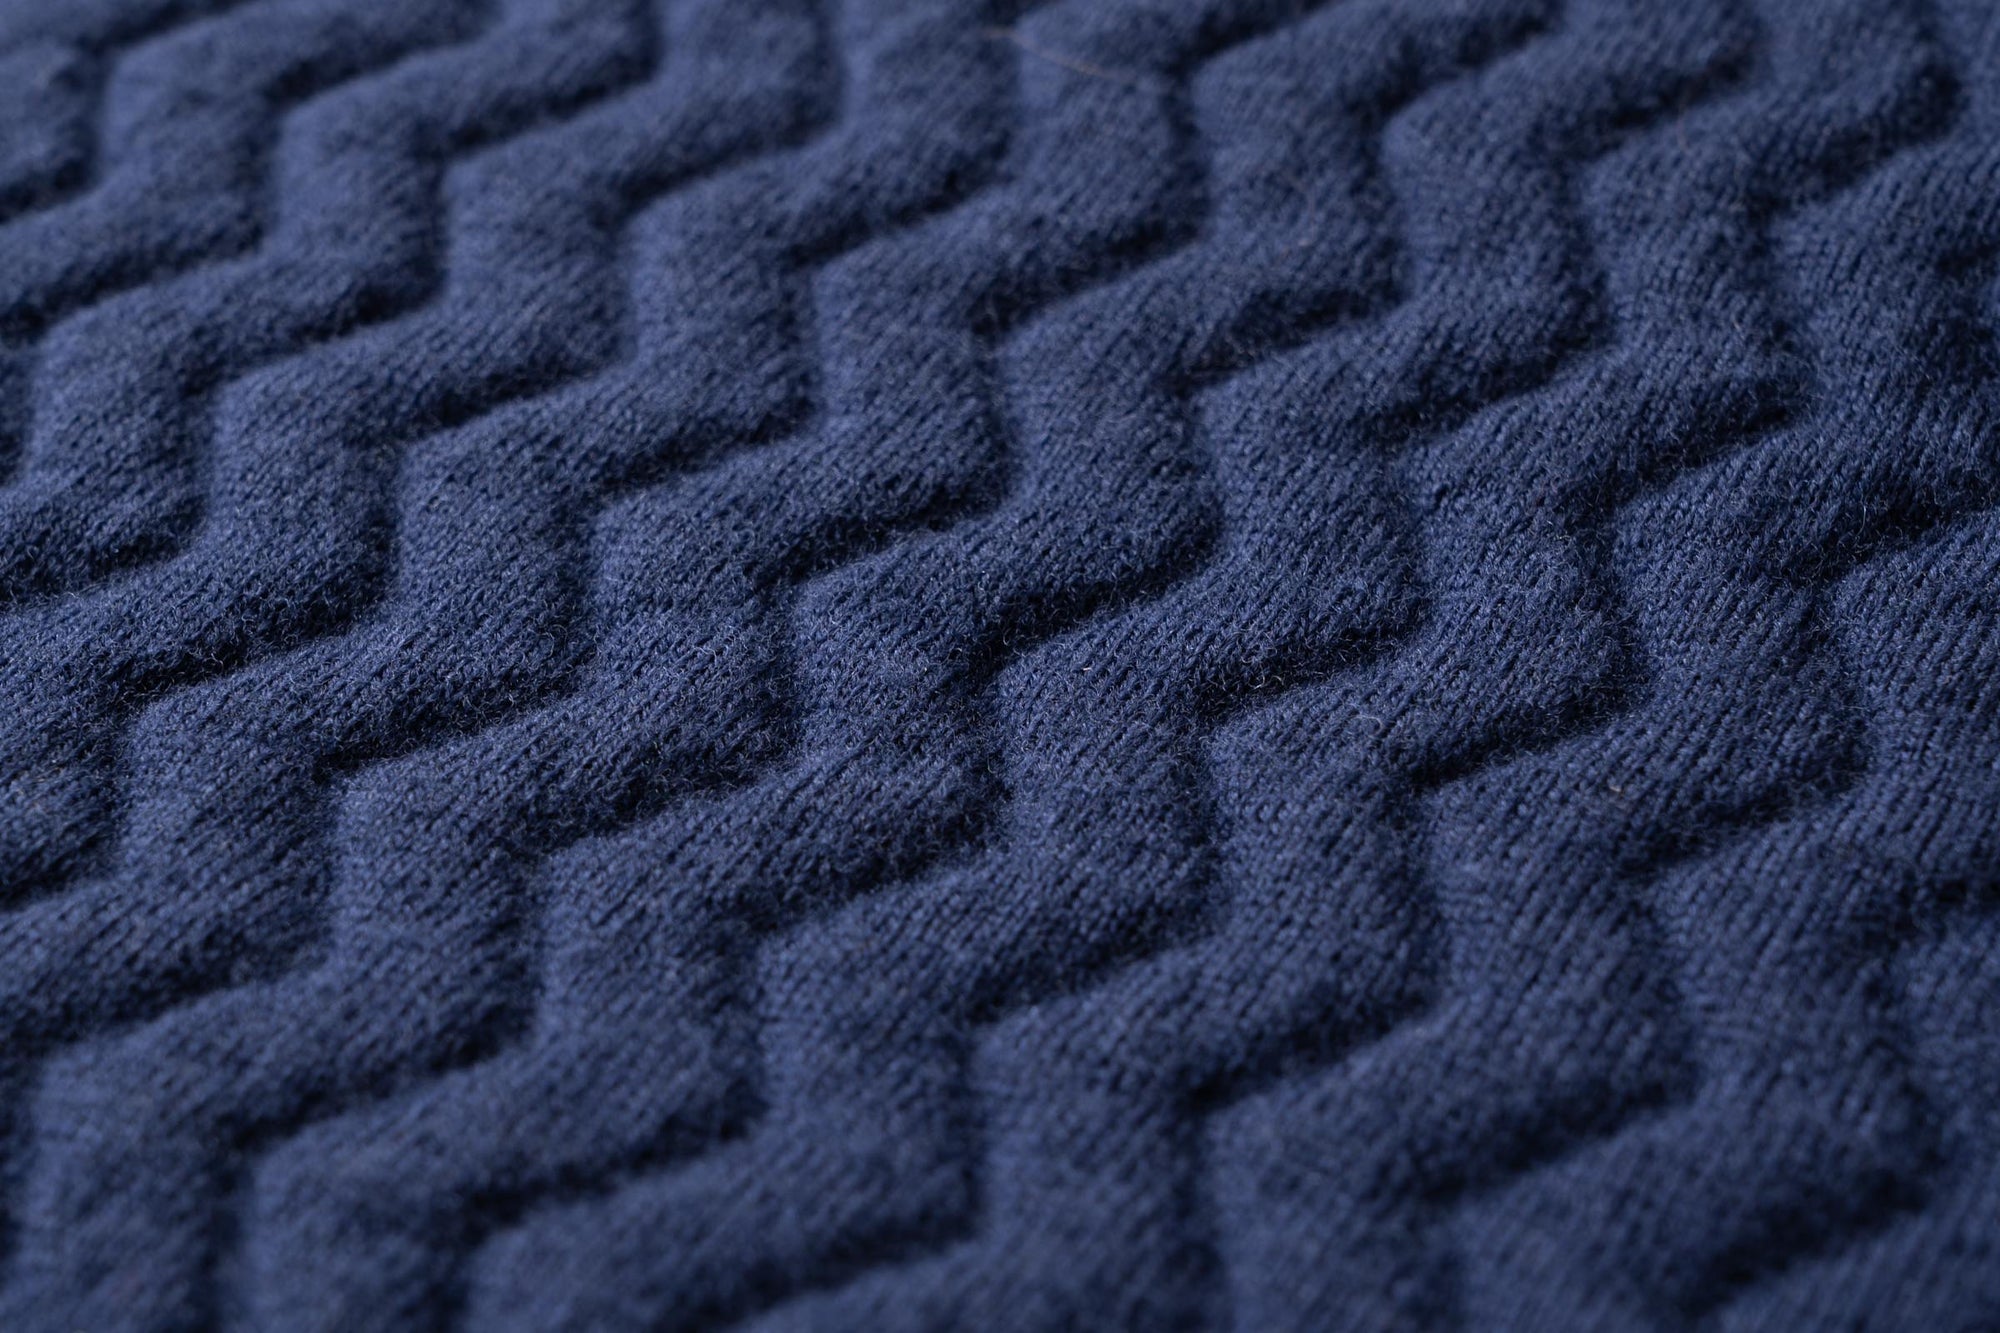 A close-up of the textured wave knit structure of the Merino d'Arles padded vest.